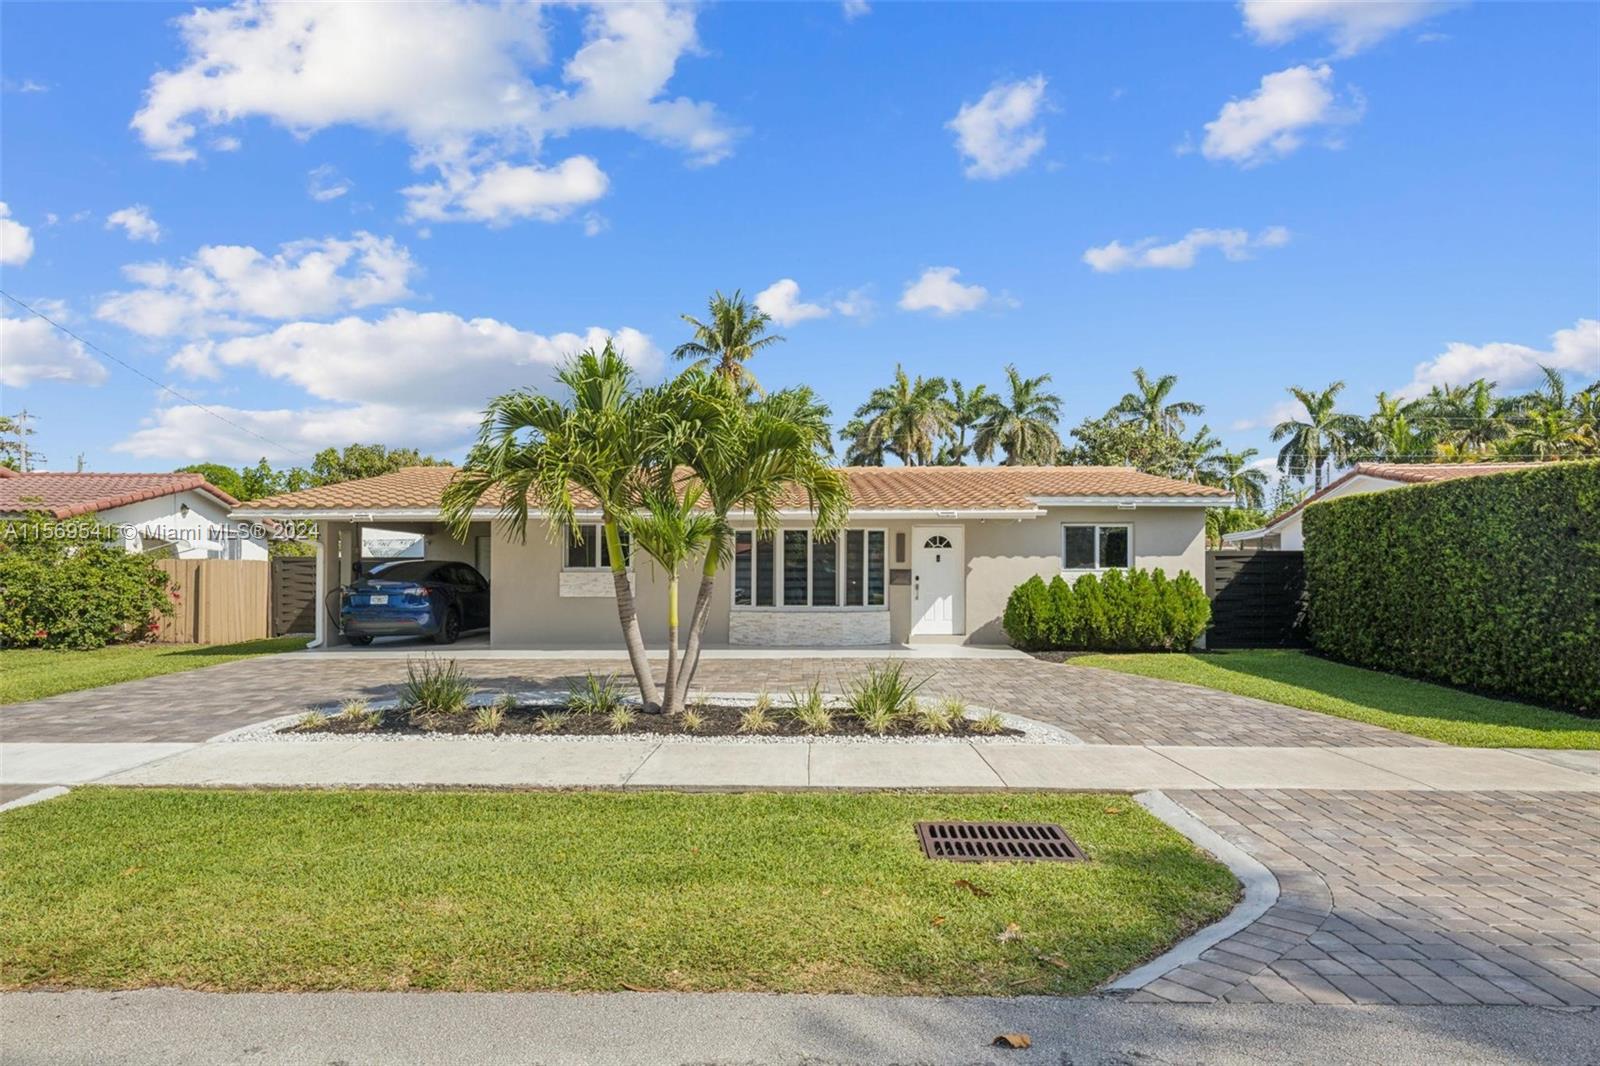 Welcome to your dream home in Hallandale Beach! This 4/3 gem boasts recent upgrades including roof, stainless appliances, electrical, and plumbing. Enjoy High impact windows, LED lighting, 22 solar panels, carport with EV charging, backup panel, and a mini-split AC. A covered BBQ area, fruit trees, RV/boat space, and a 10x14ft shed complete the backyard. Plus, find a versatile 1 bed/office with a full bath and private entrance, perfect for generating extra income. Minutes away from the beach, dining, shopping, and major highways and airports.
"By appointment only"